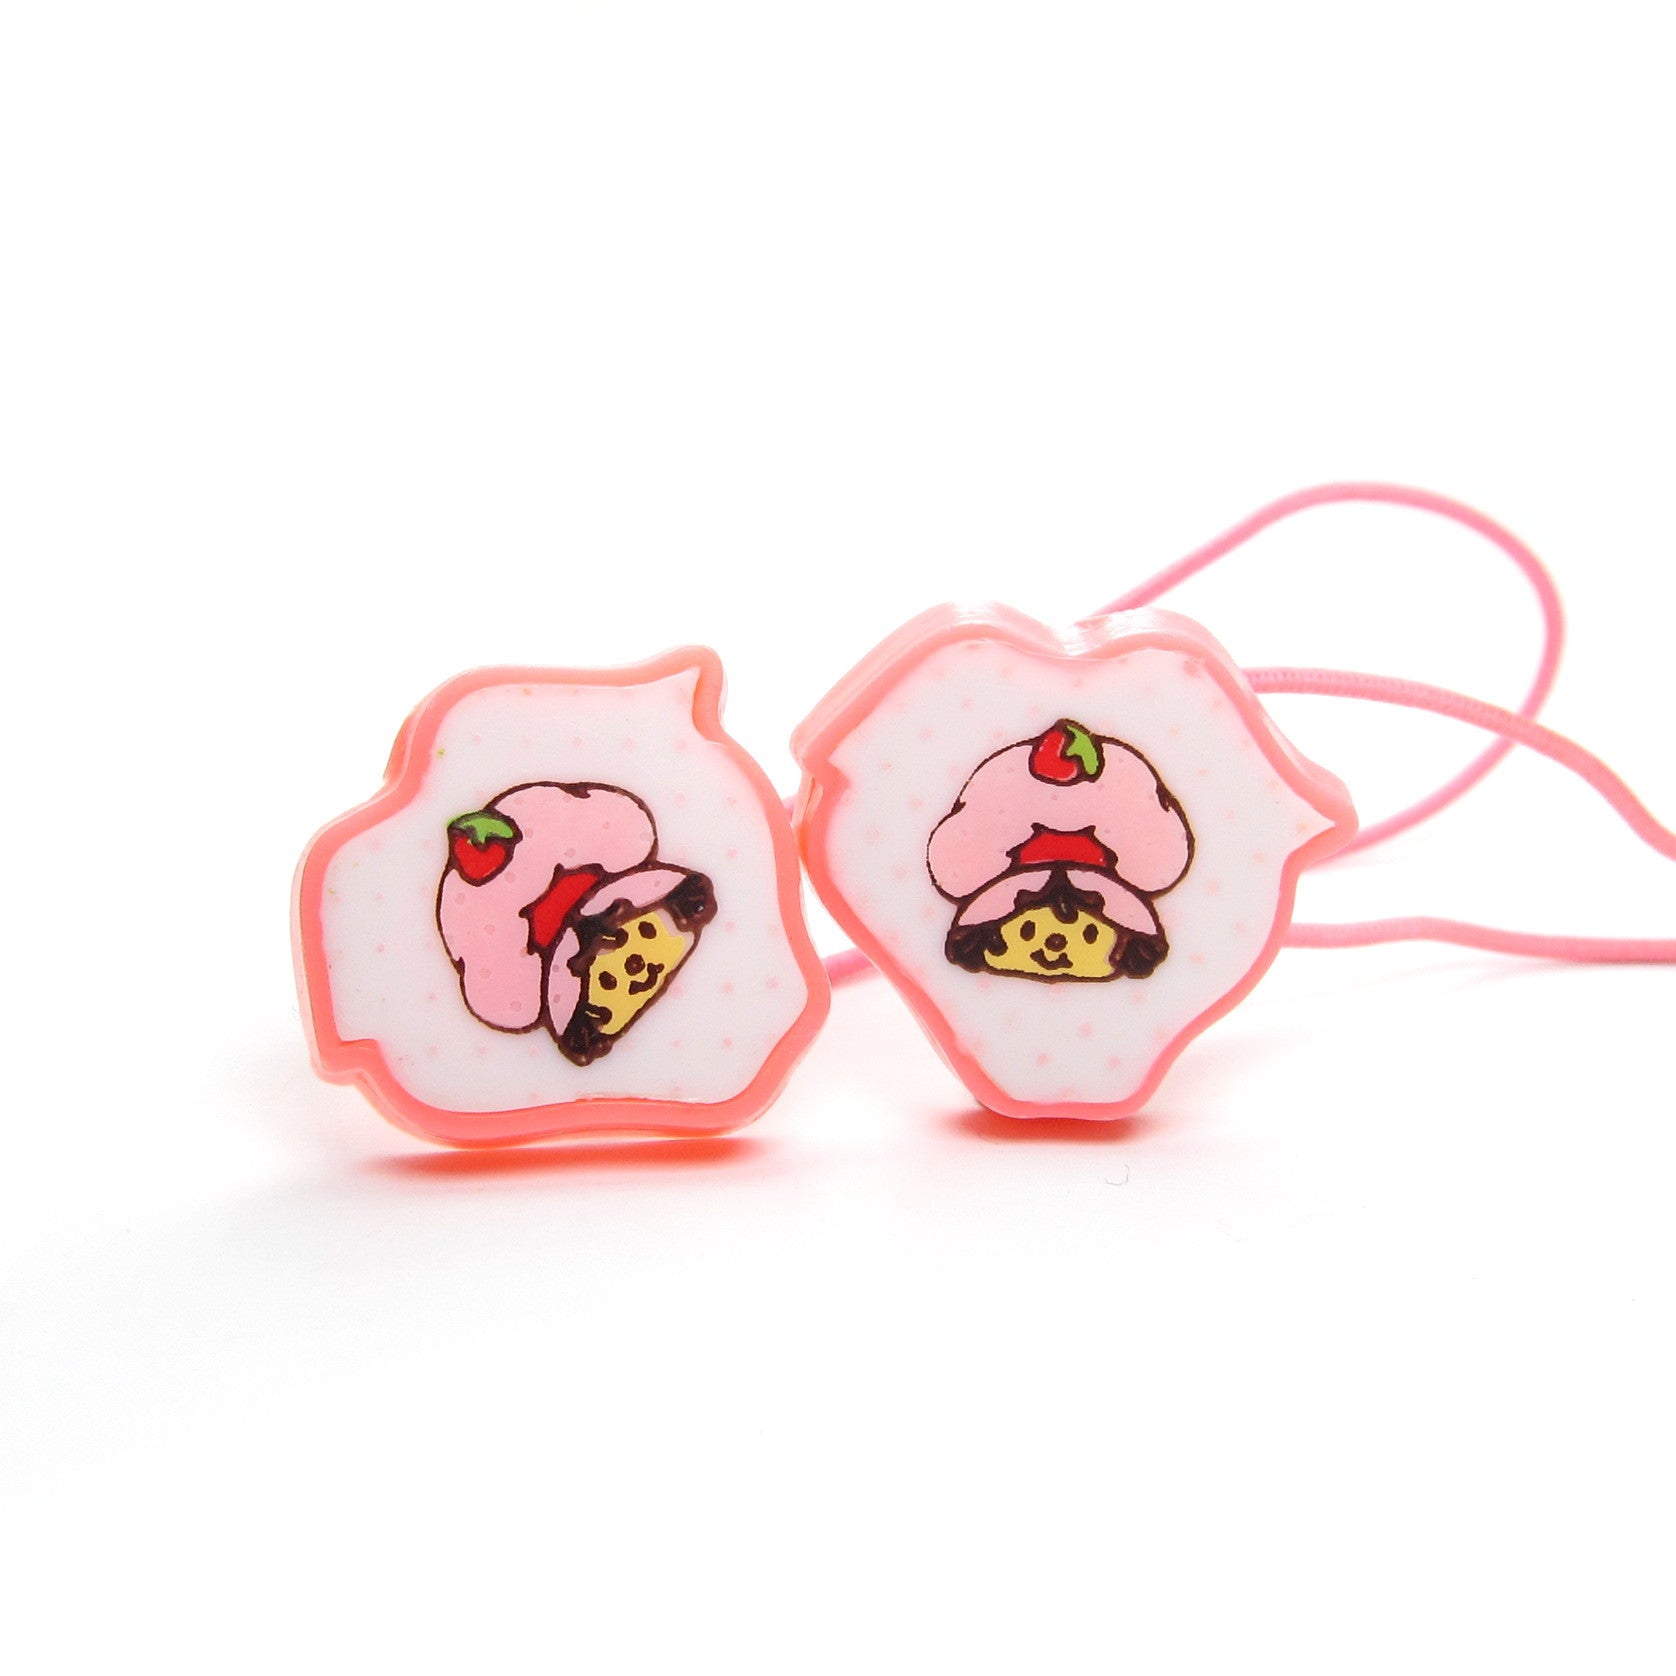 Sanrio Rubber Band in Plastic Container Hair Ties Kids Accessories